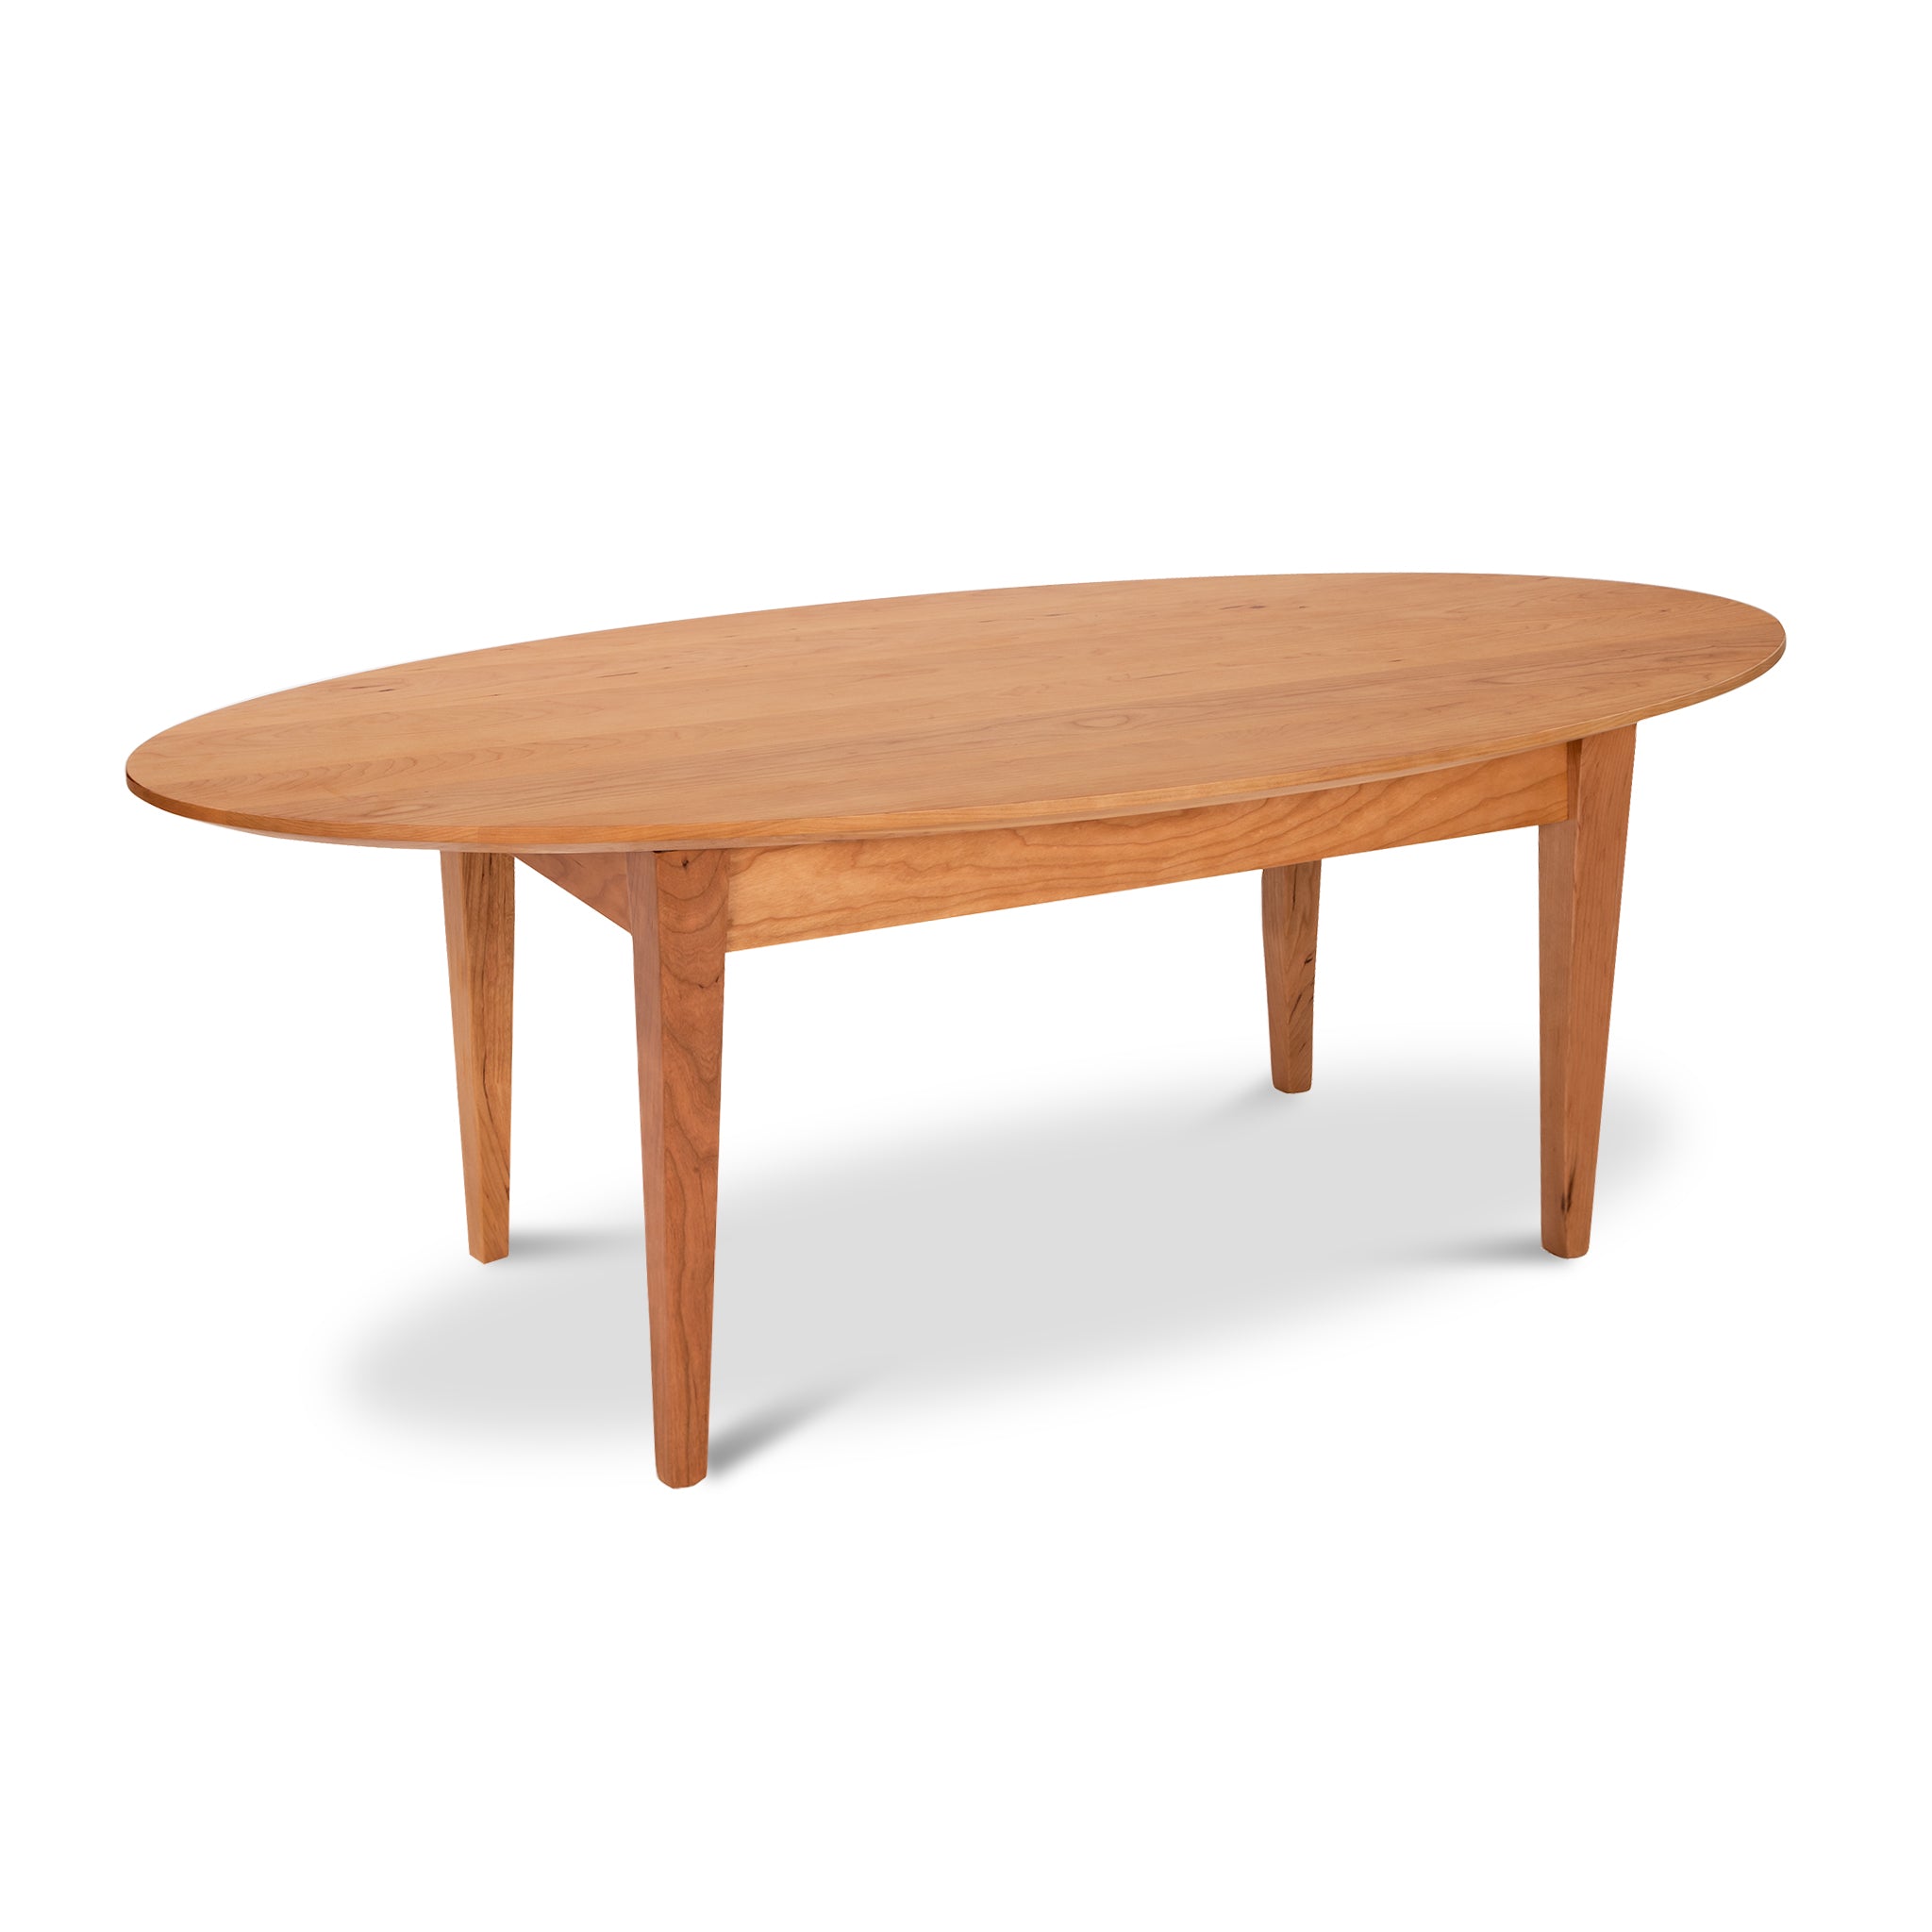 A sustainably harvested Lyndon Furniture Special Order (Spangler) Classic Shaker Oval Coffee Table - Bevel Edge with a wooden top.